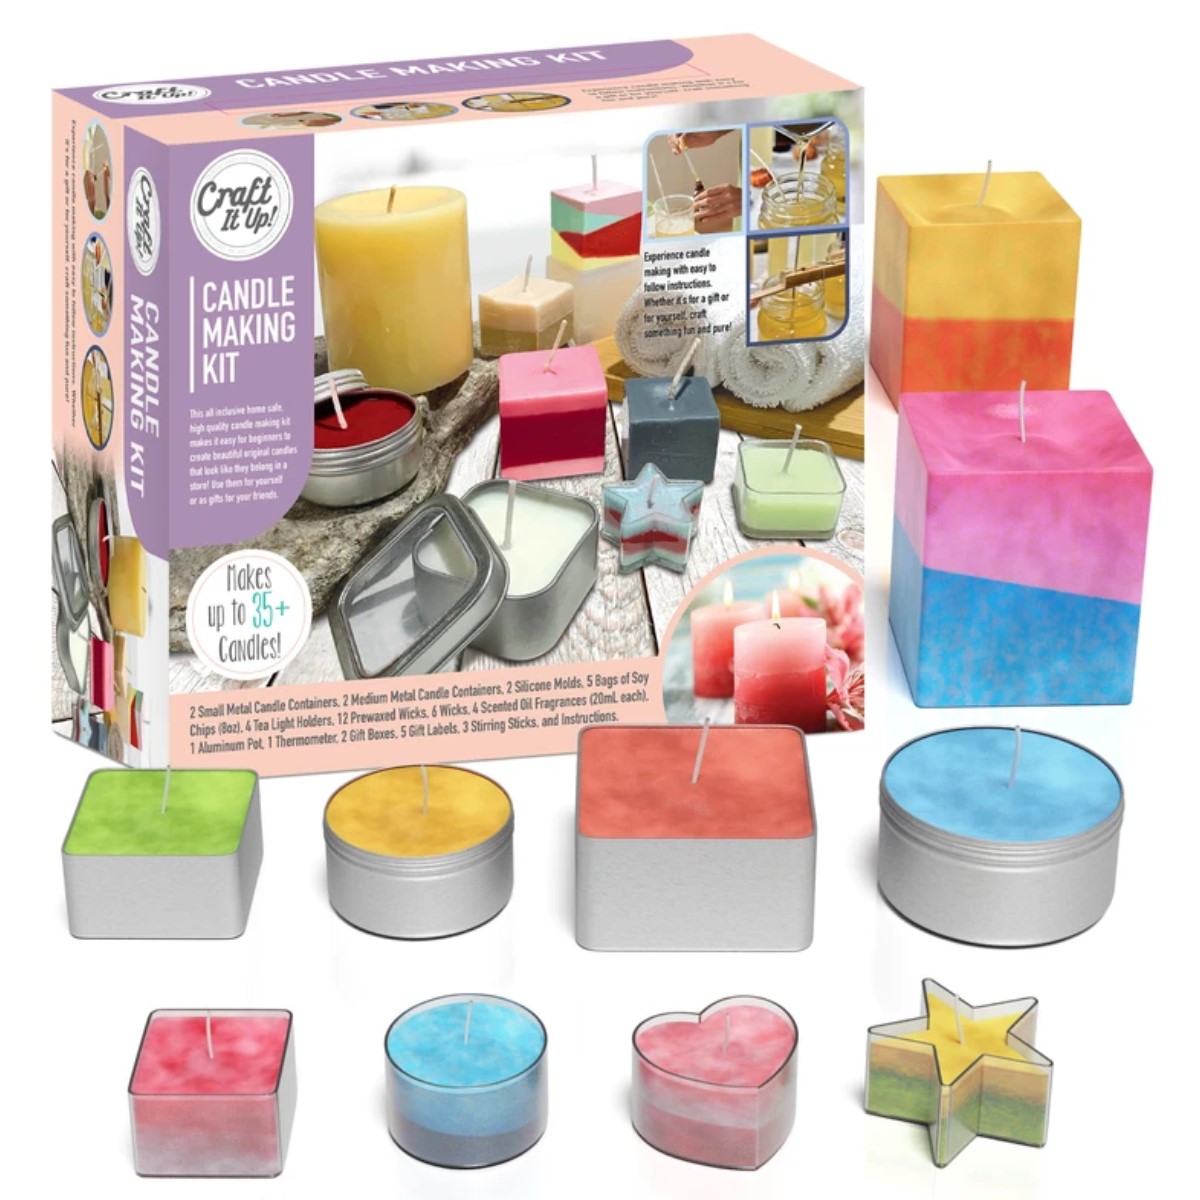 https://geppettostoybox.com/wp-content/uploads/2020/12/candle-making-1.jpg